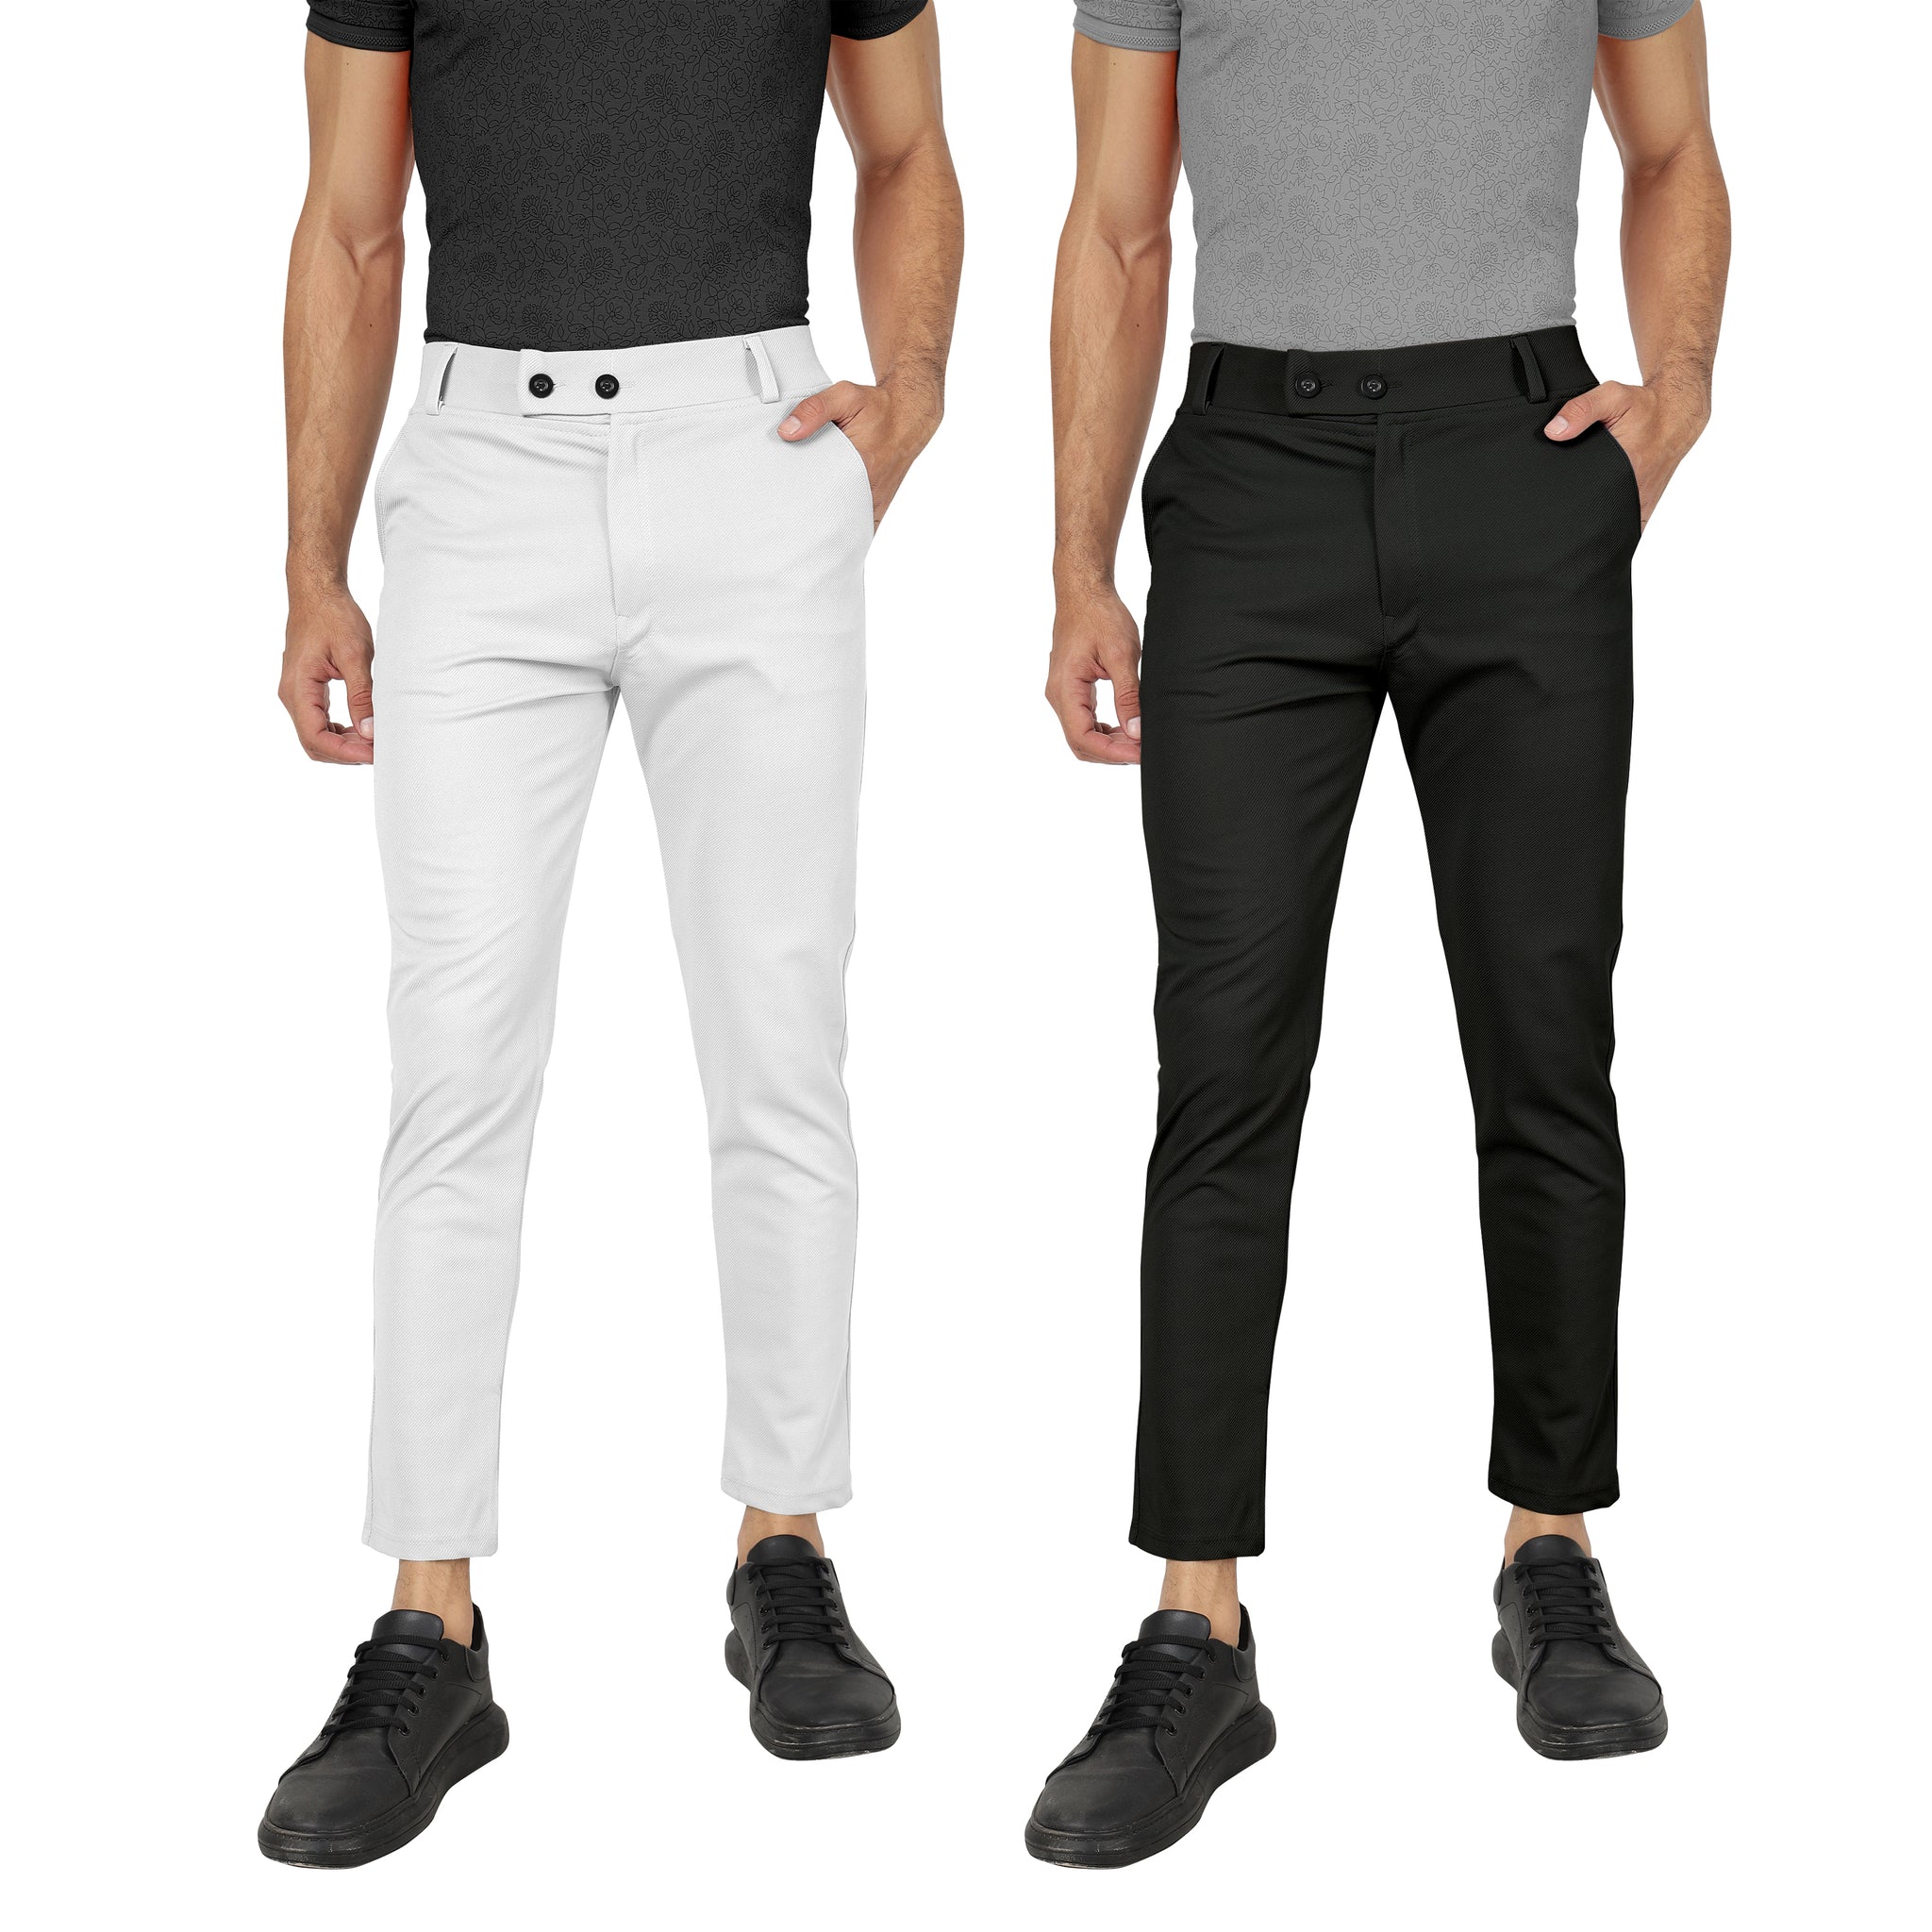 Combo Pack Of 2 White And Black Lycra Stretchable Formal Stylish Slim Fit Trousers.